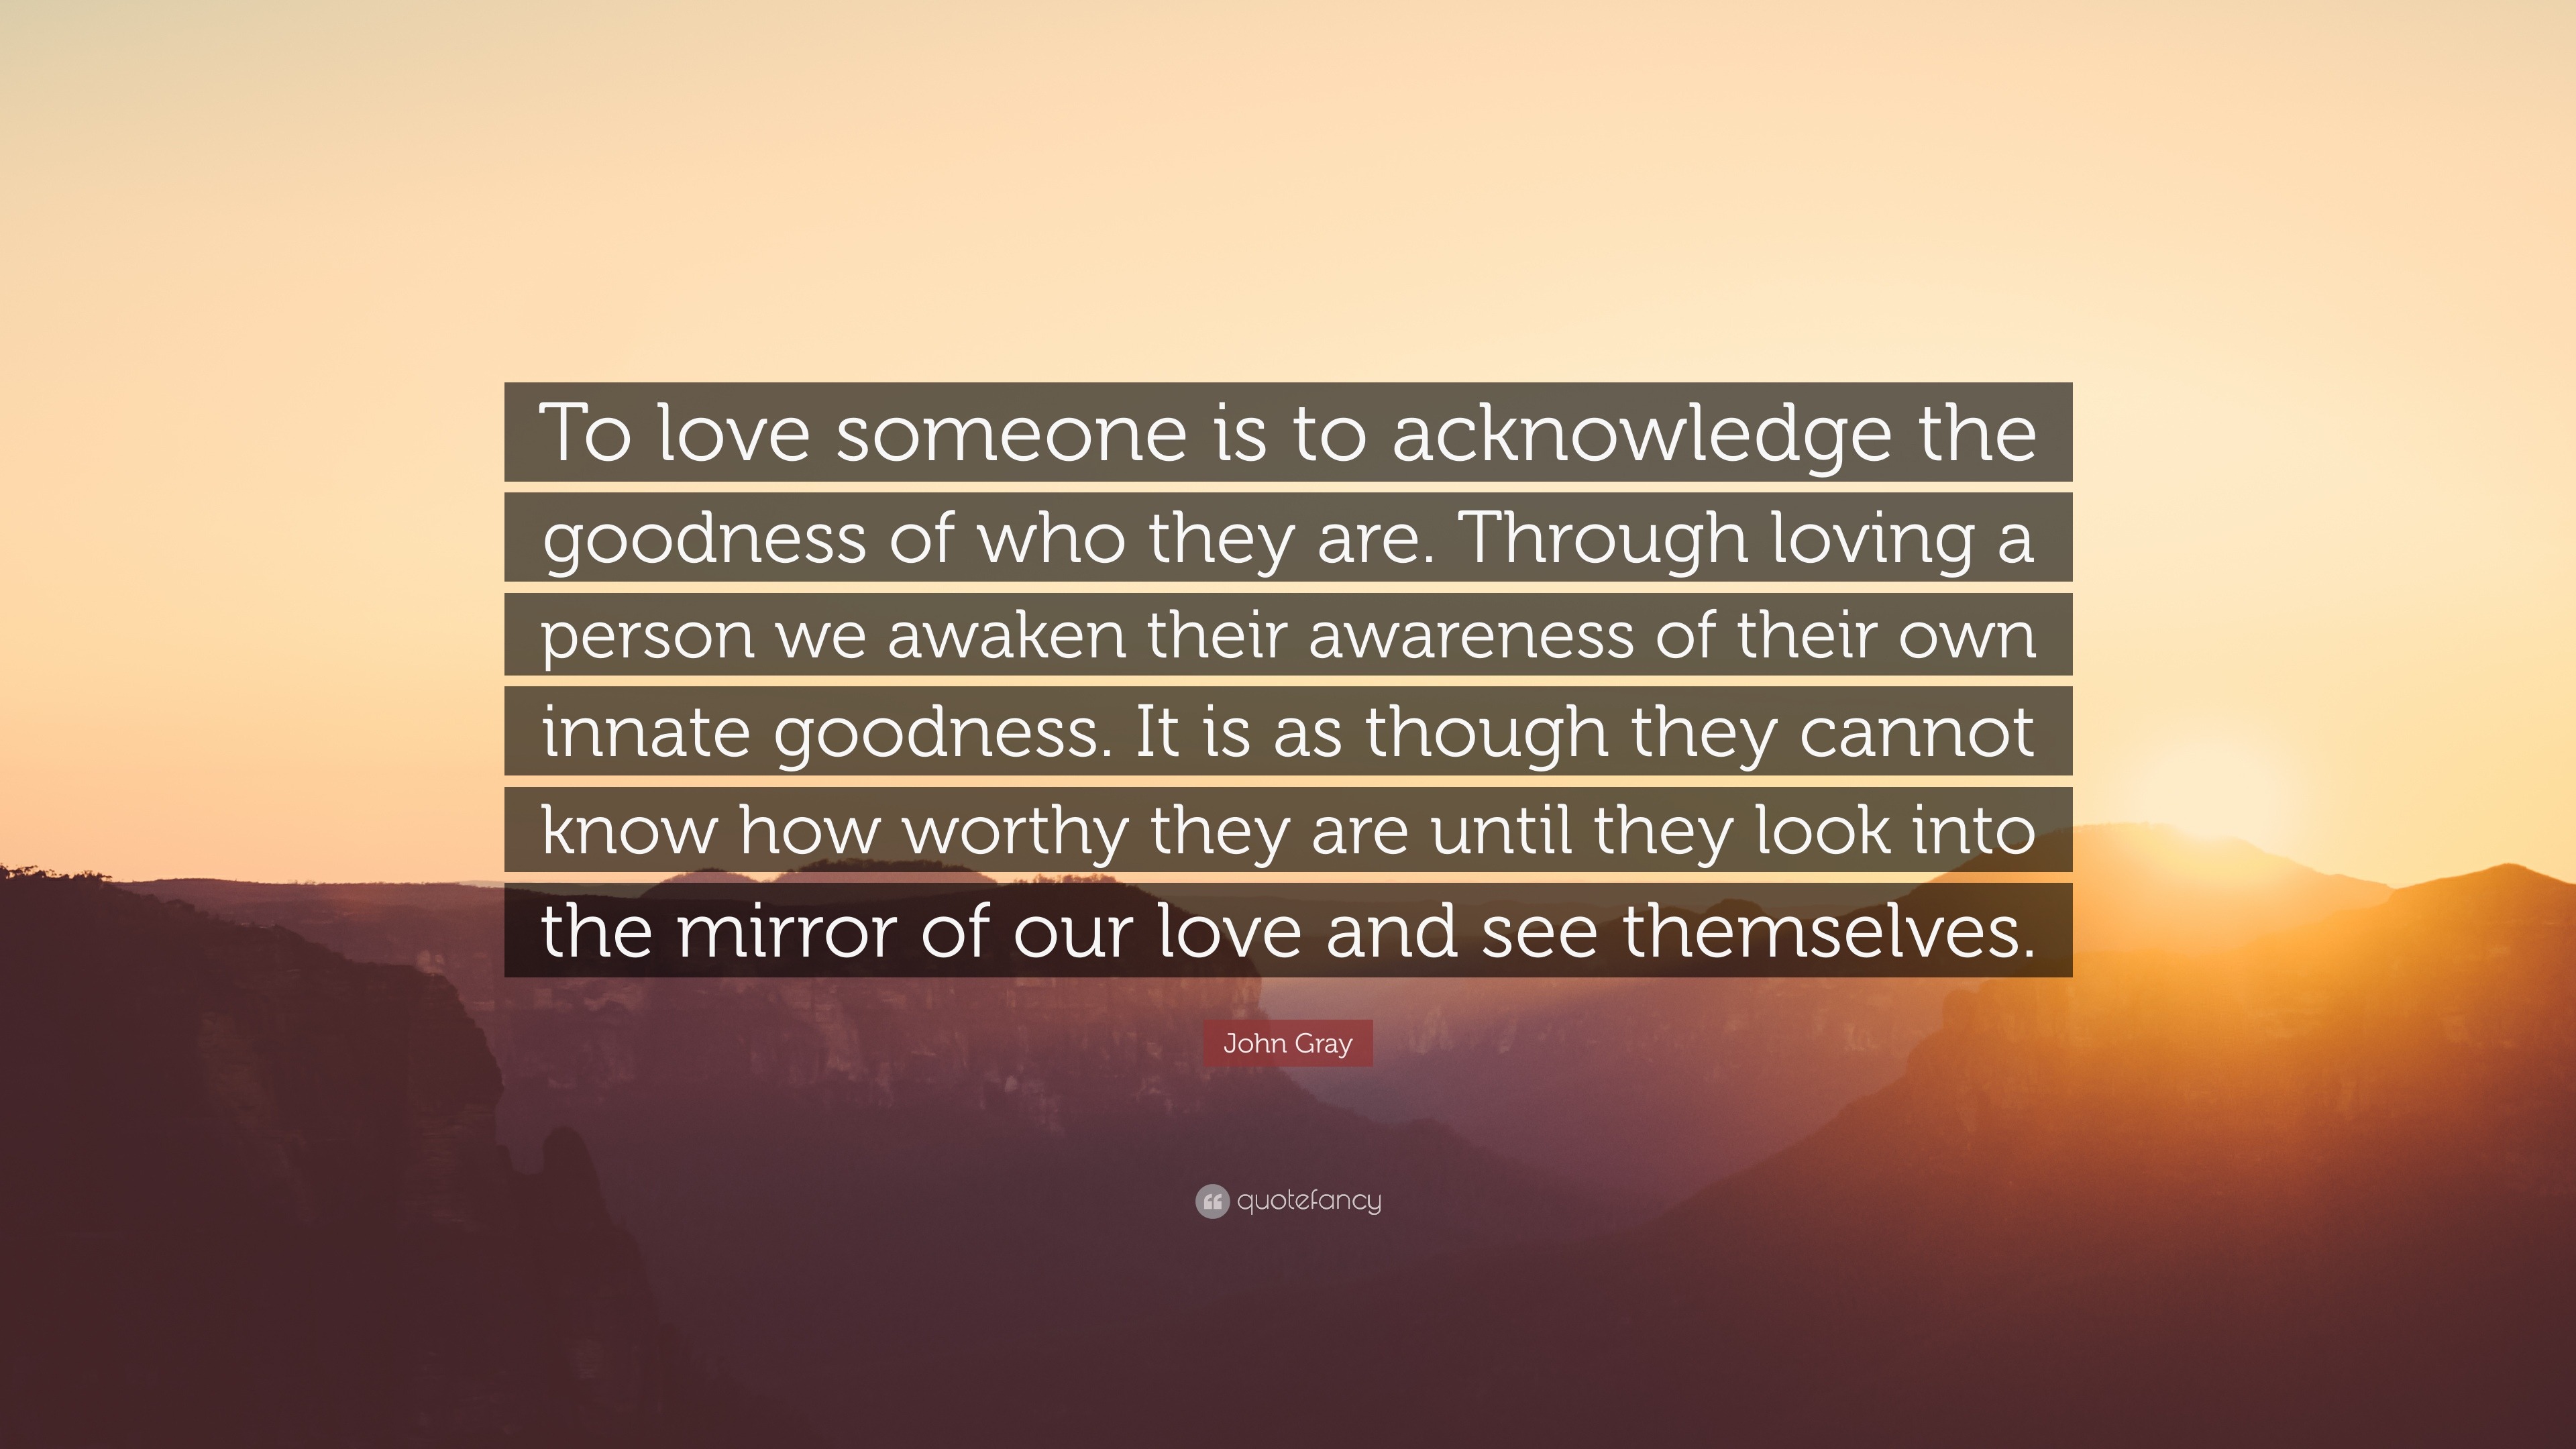 John Gray Quote “To love someone is to acknowledge the goodness of who they